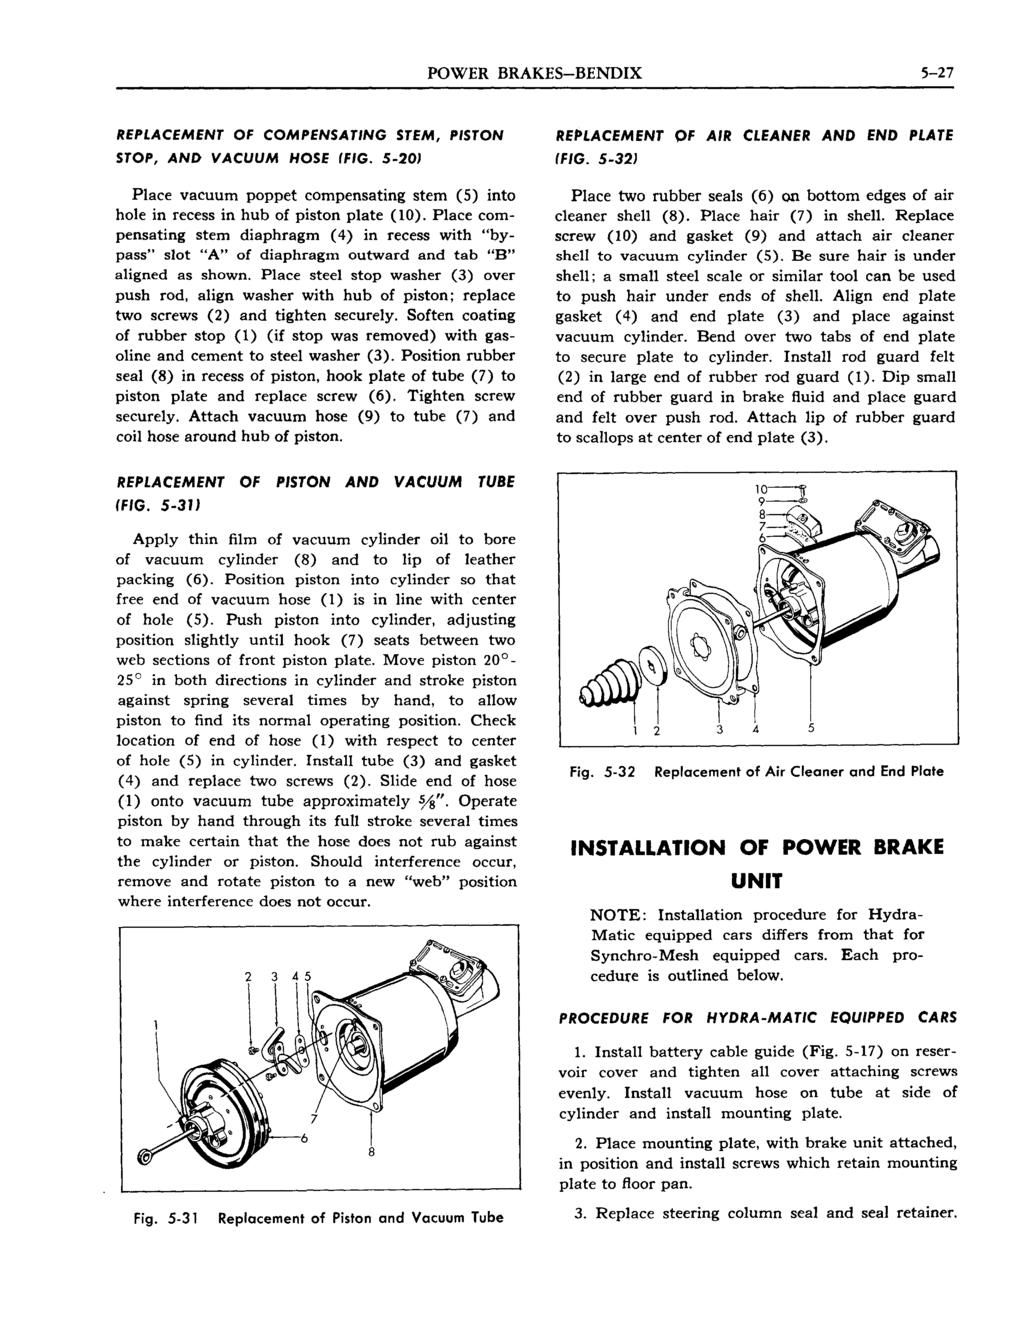 POWER BRAKES-BENDIX 5-27 REPLACEMENT OF COMPENSATING STEM, PISTON STOP, AND VACUUM HOSE (FIG. 5-20J Place vacuum poppet compensating stem (5) into hole in recess in hub of piston plate (10).